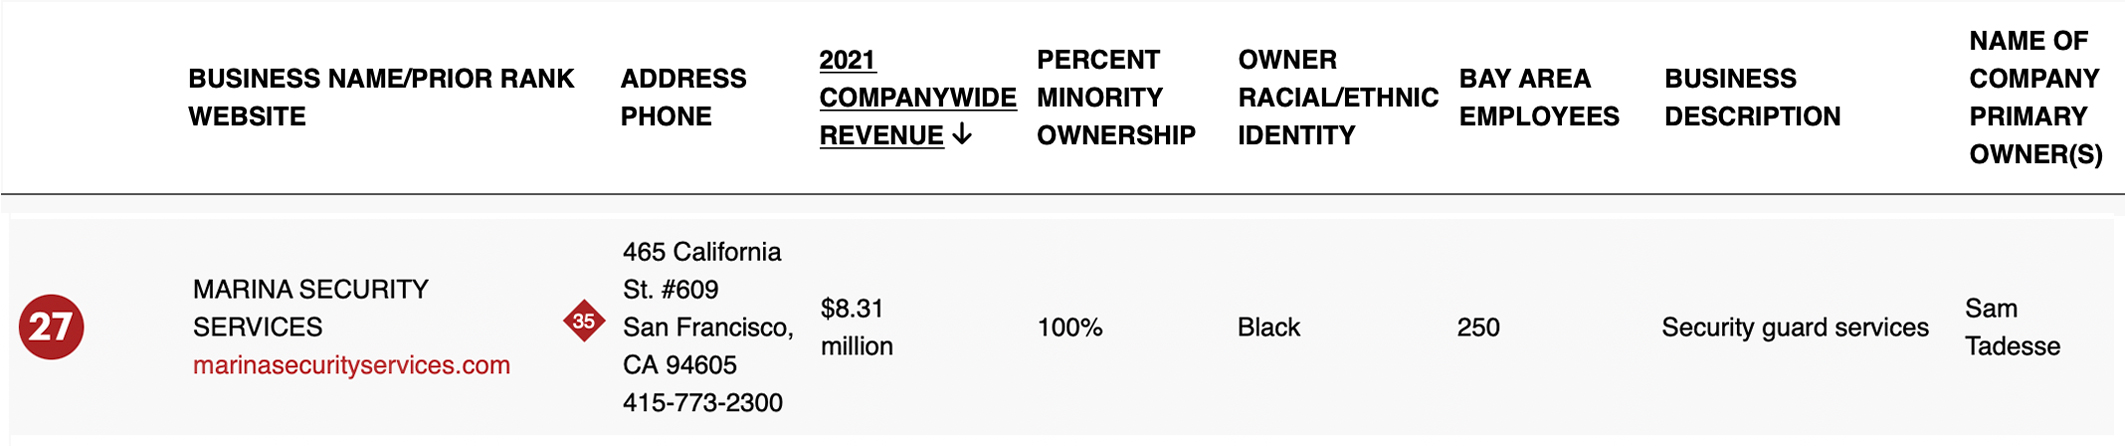 Largest Minority Owned Businesses Bay Area